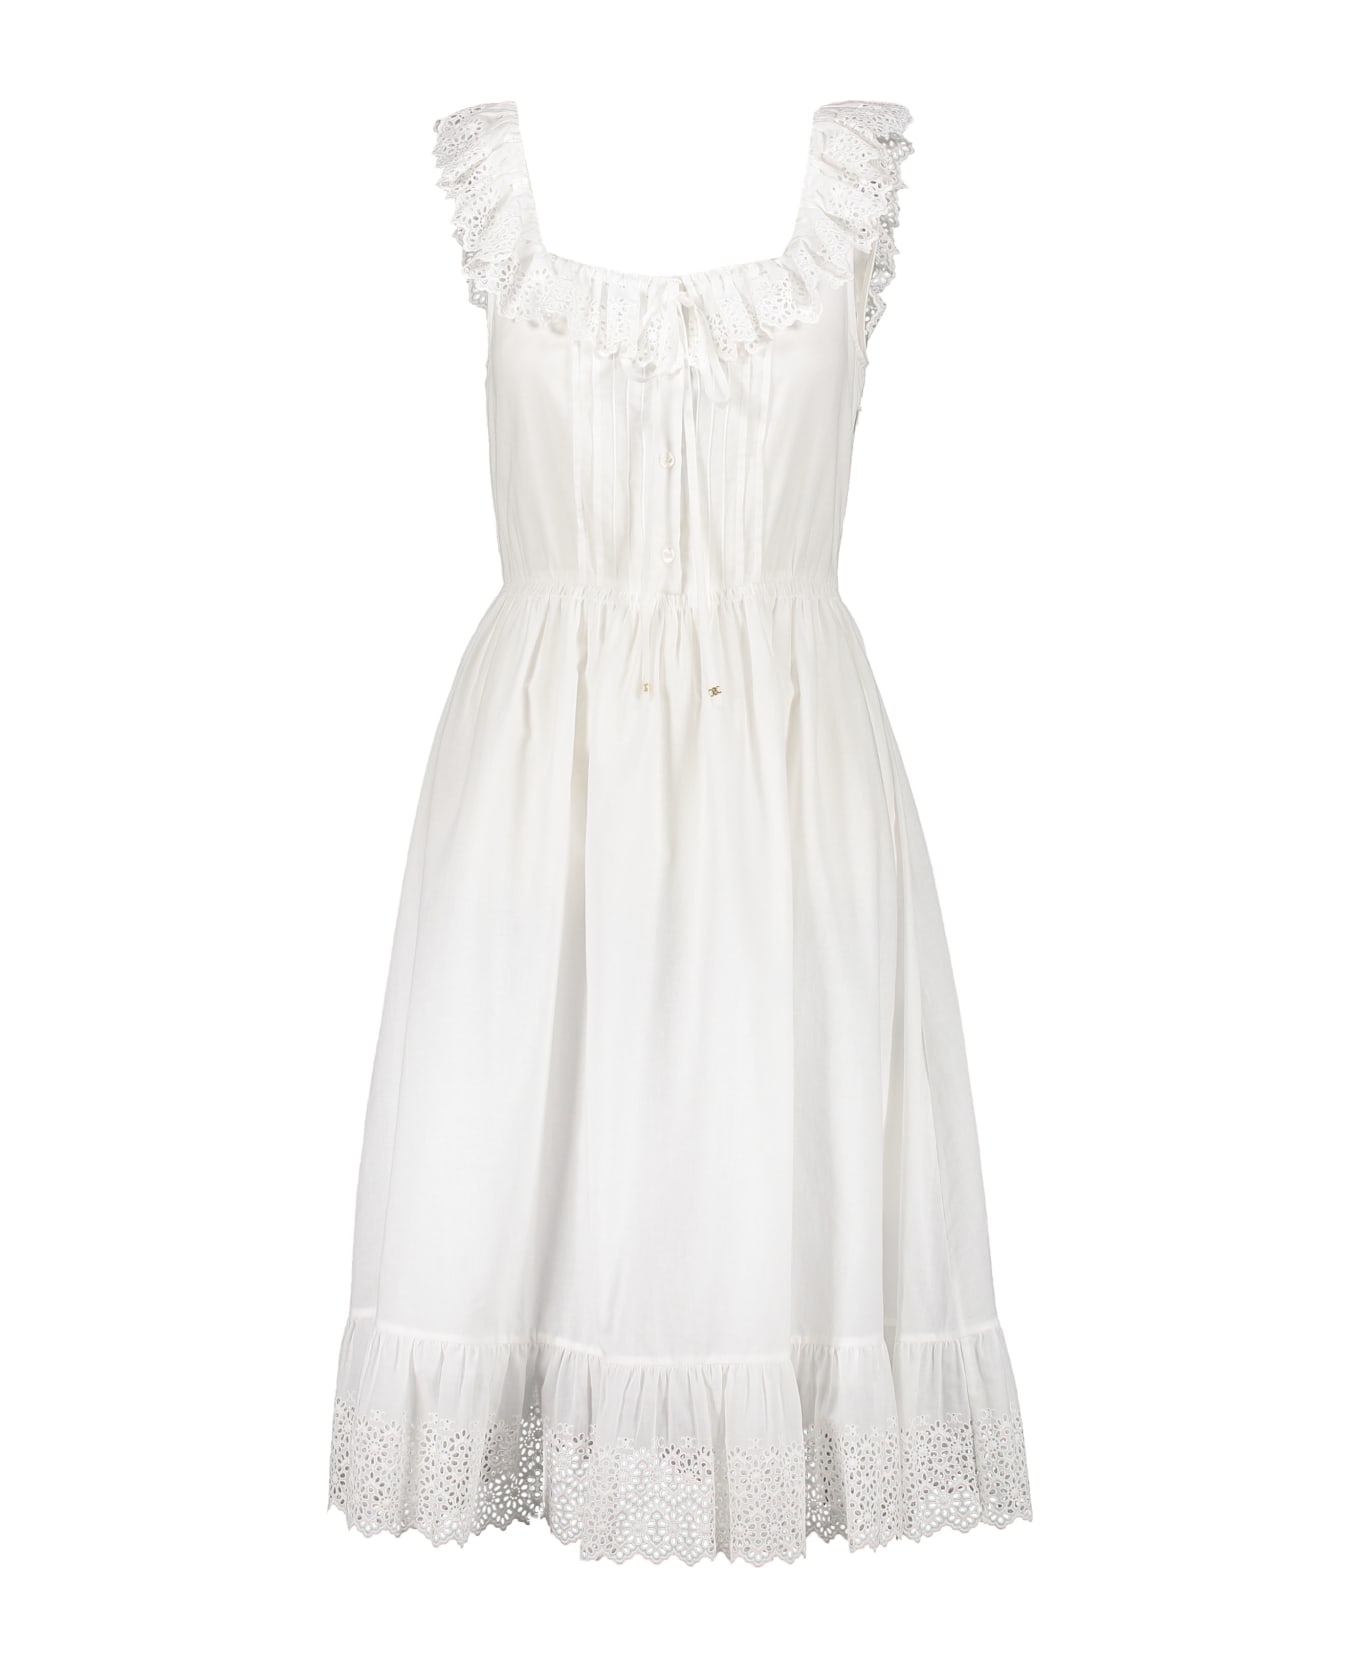 Celine Floral Embroidered Cotton Dress - White